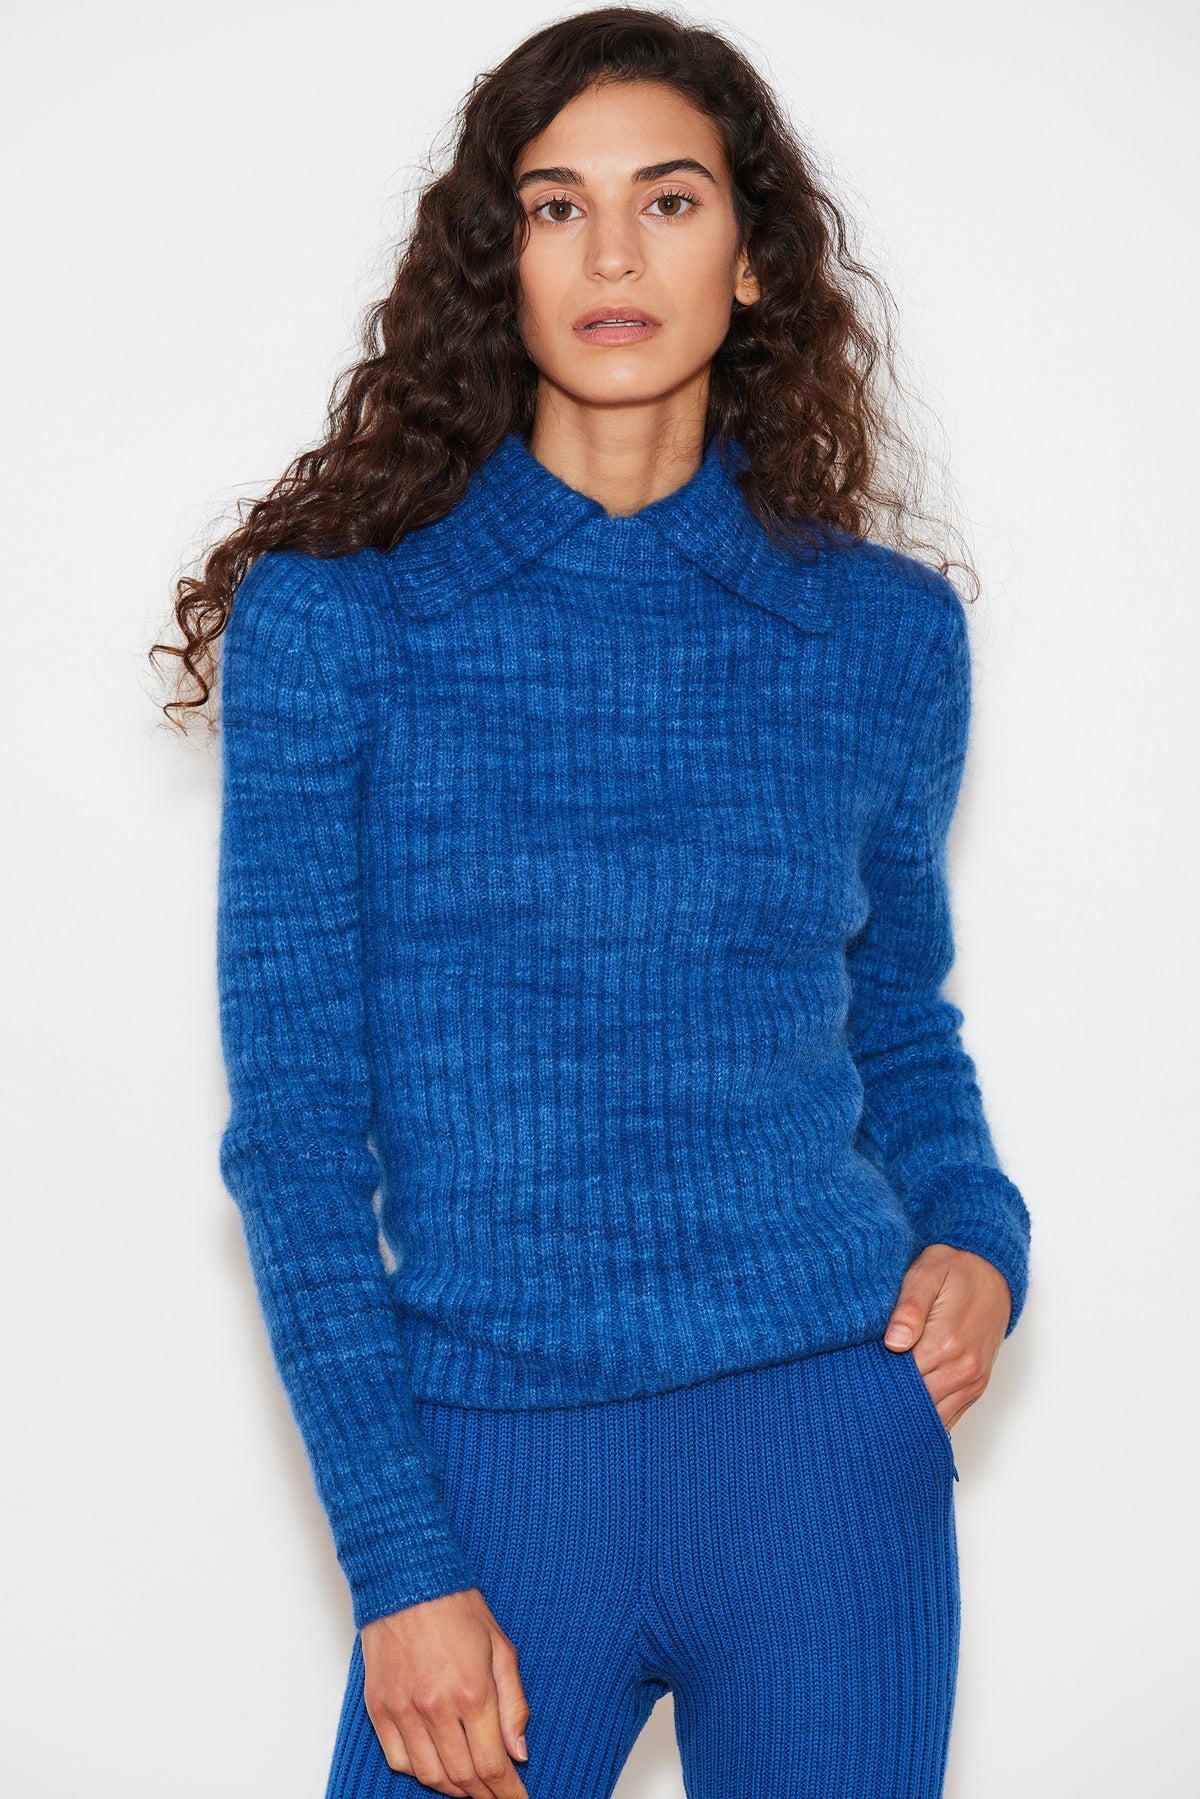 Adult Ines Sweater - Blueberry